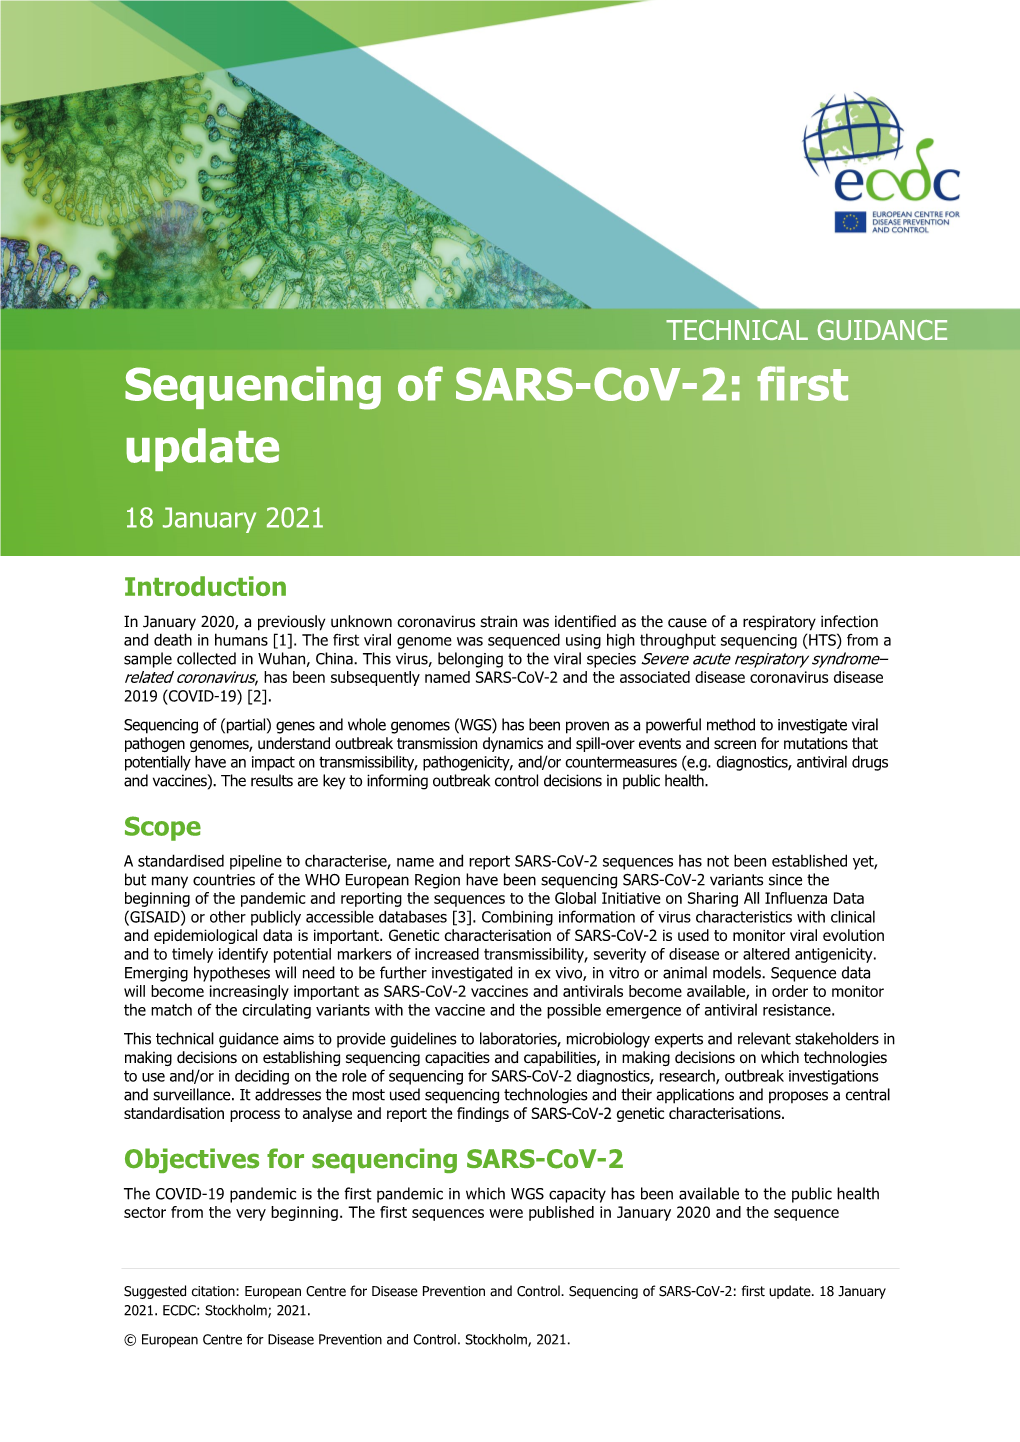 Sequencing of SARS-Cov-2: First Update